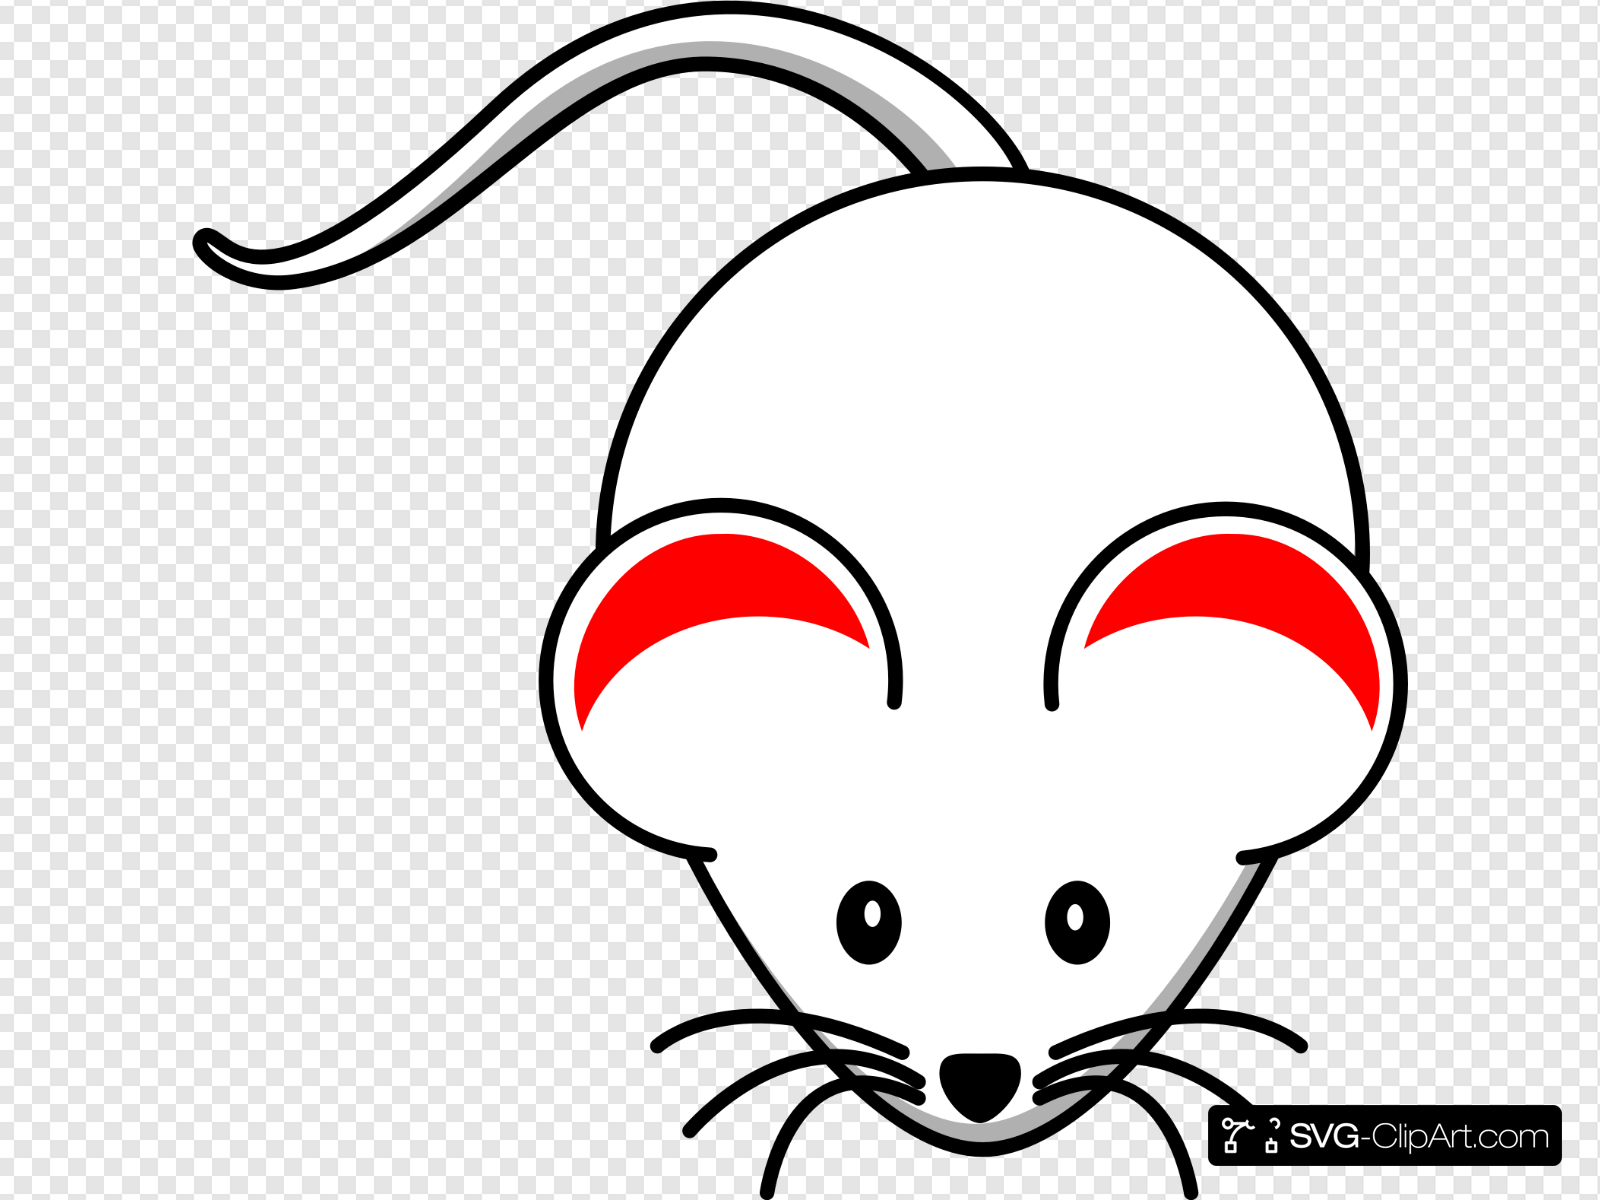 White Mouse Red Ears Clip art, Icon and SVG.